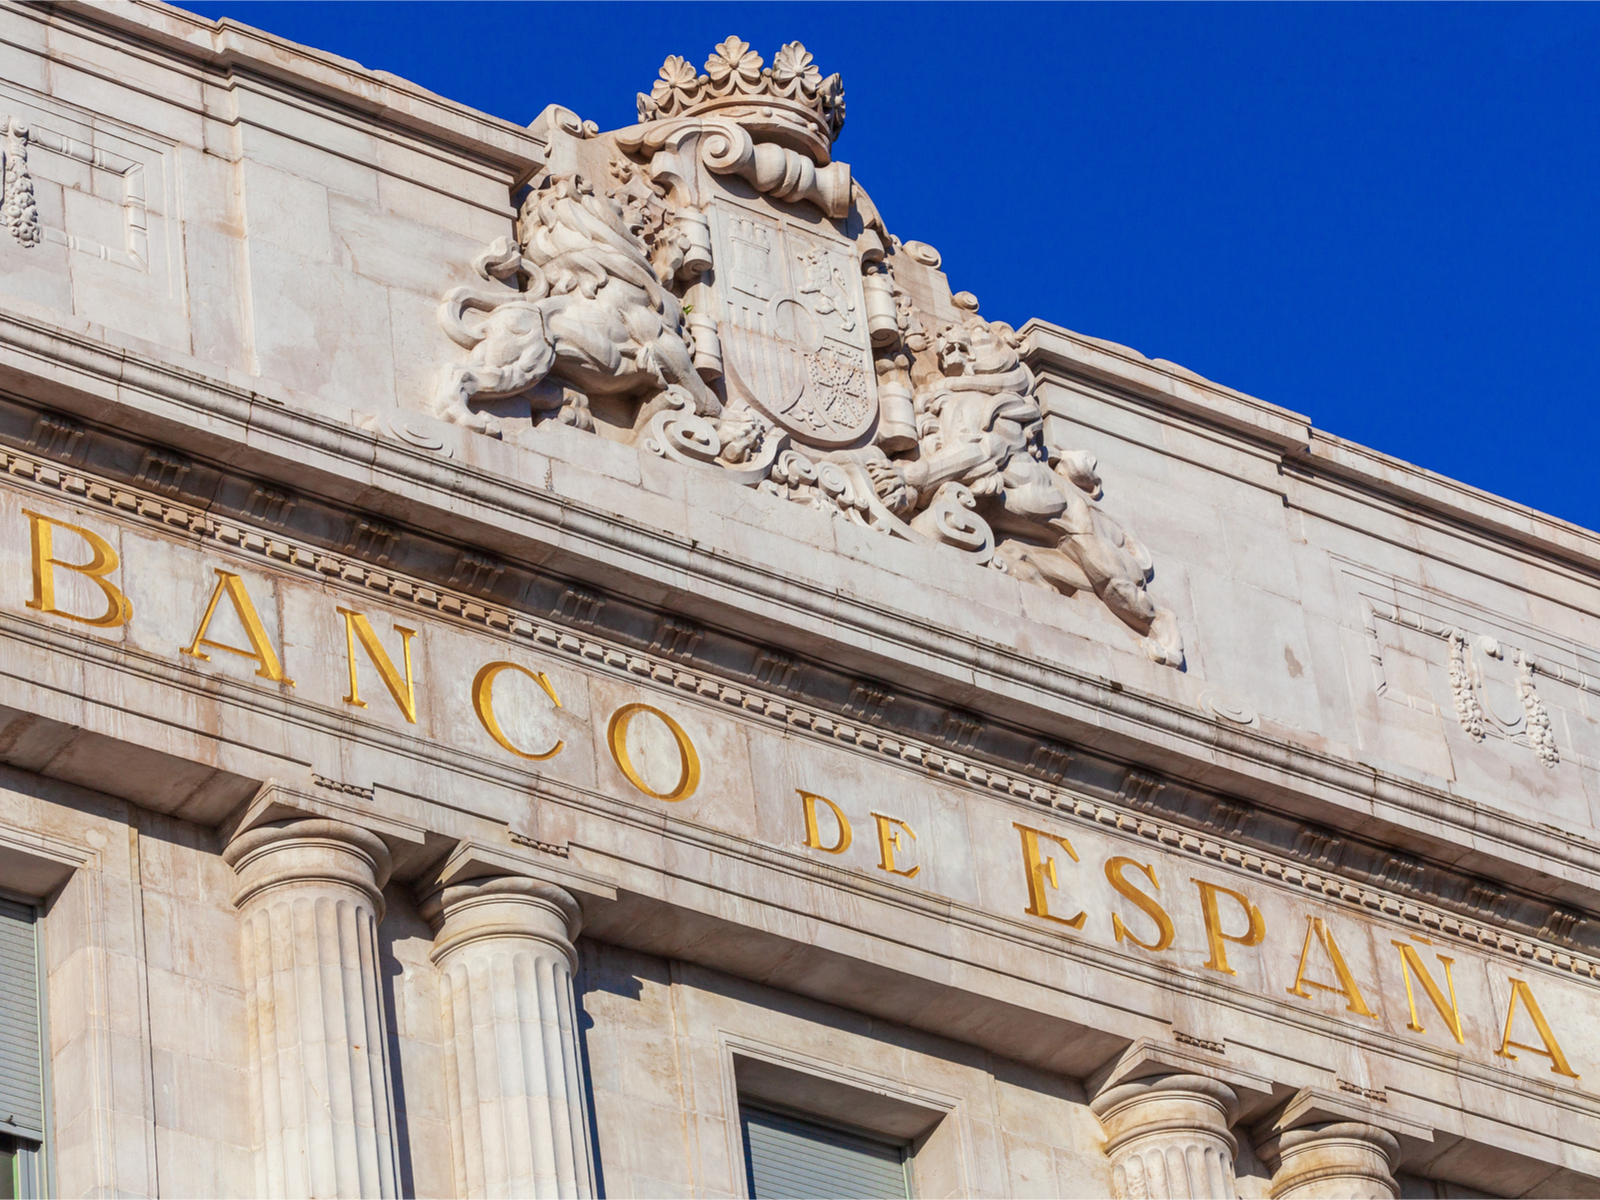 Bank of Spain Report: Bitcoin Is a Solution for the Creation of a System Without Censorship